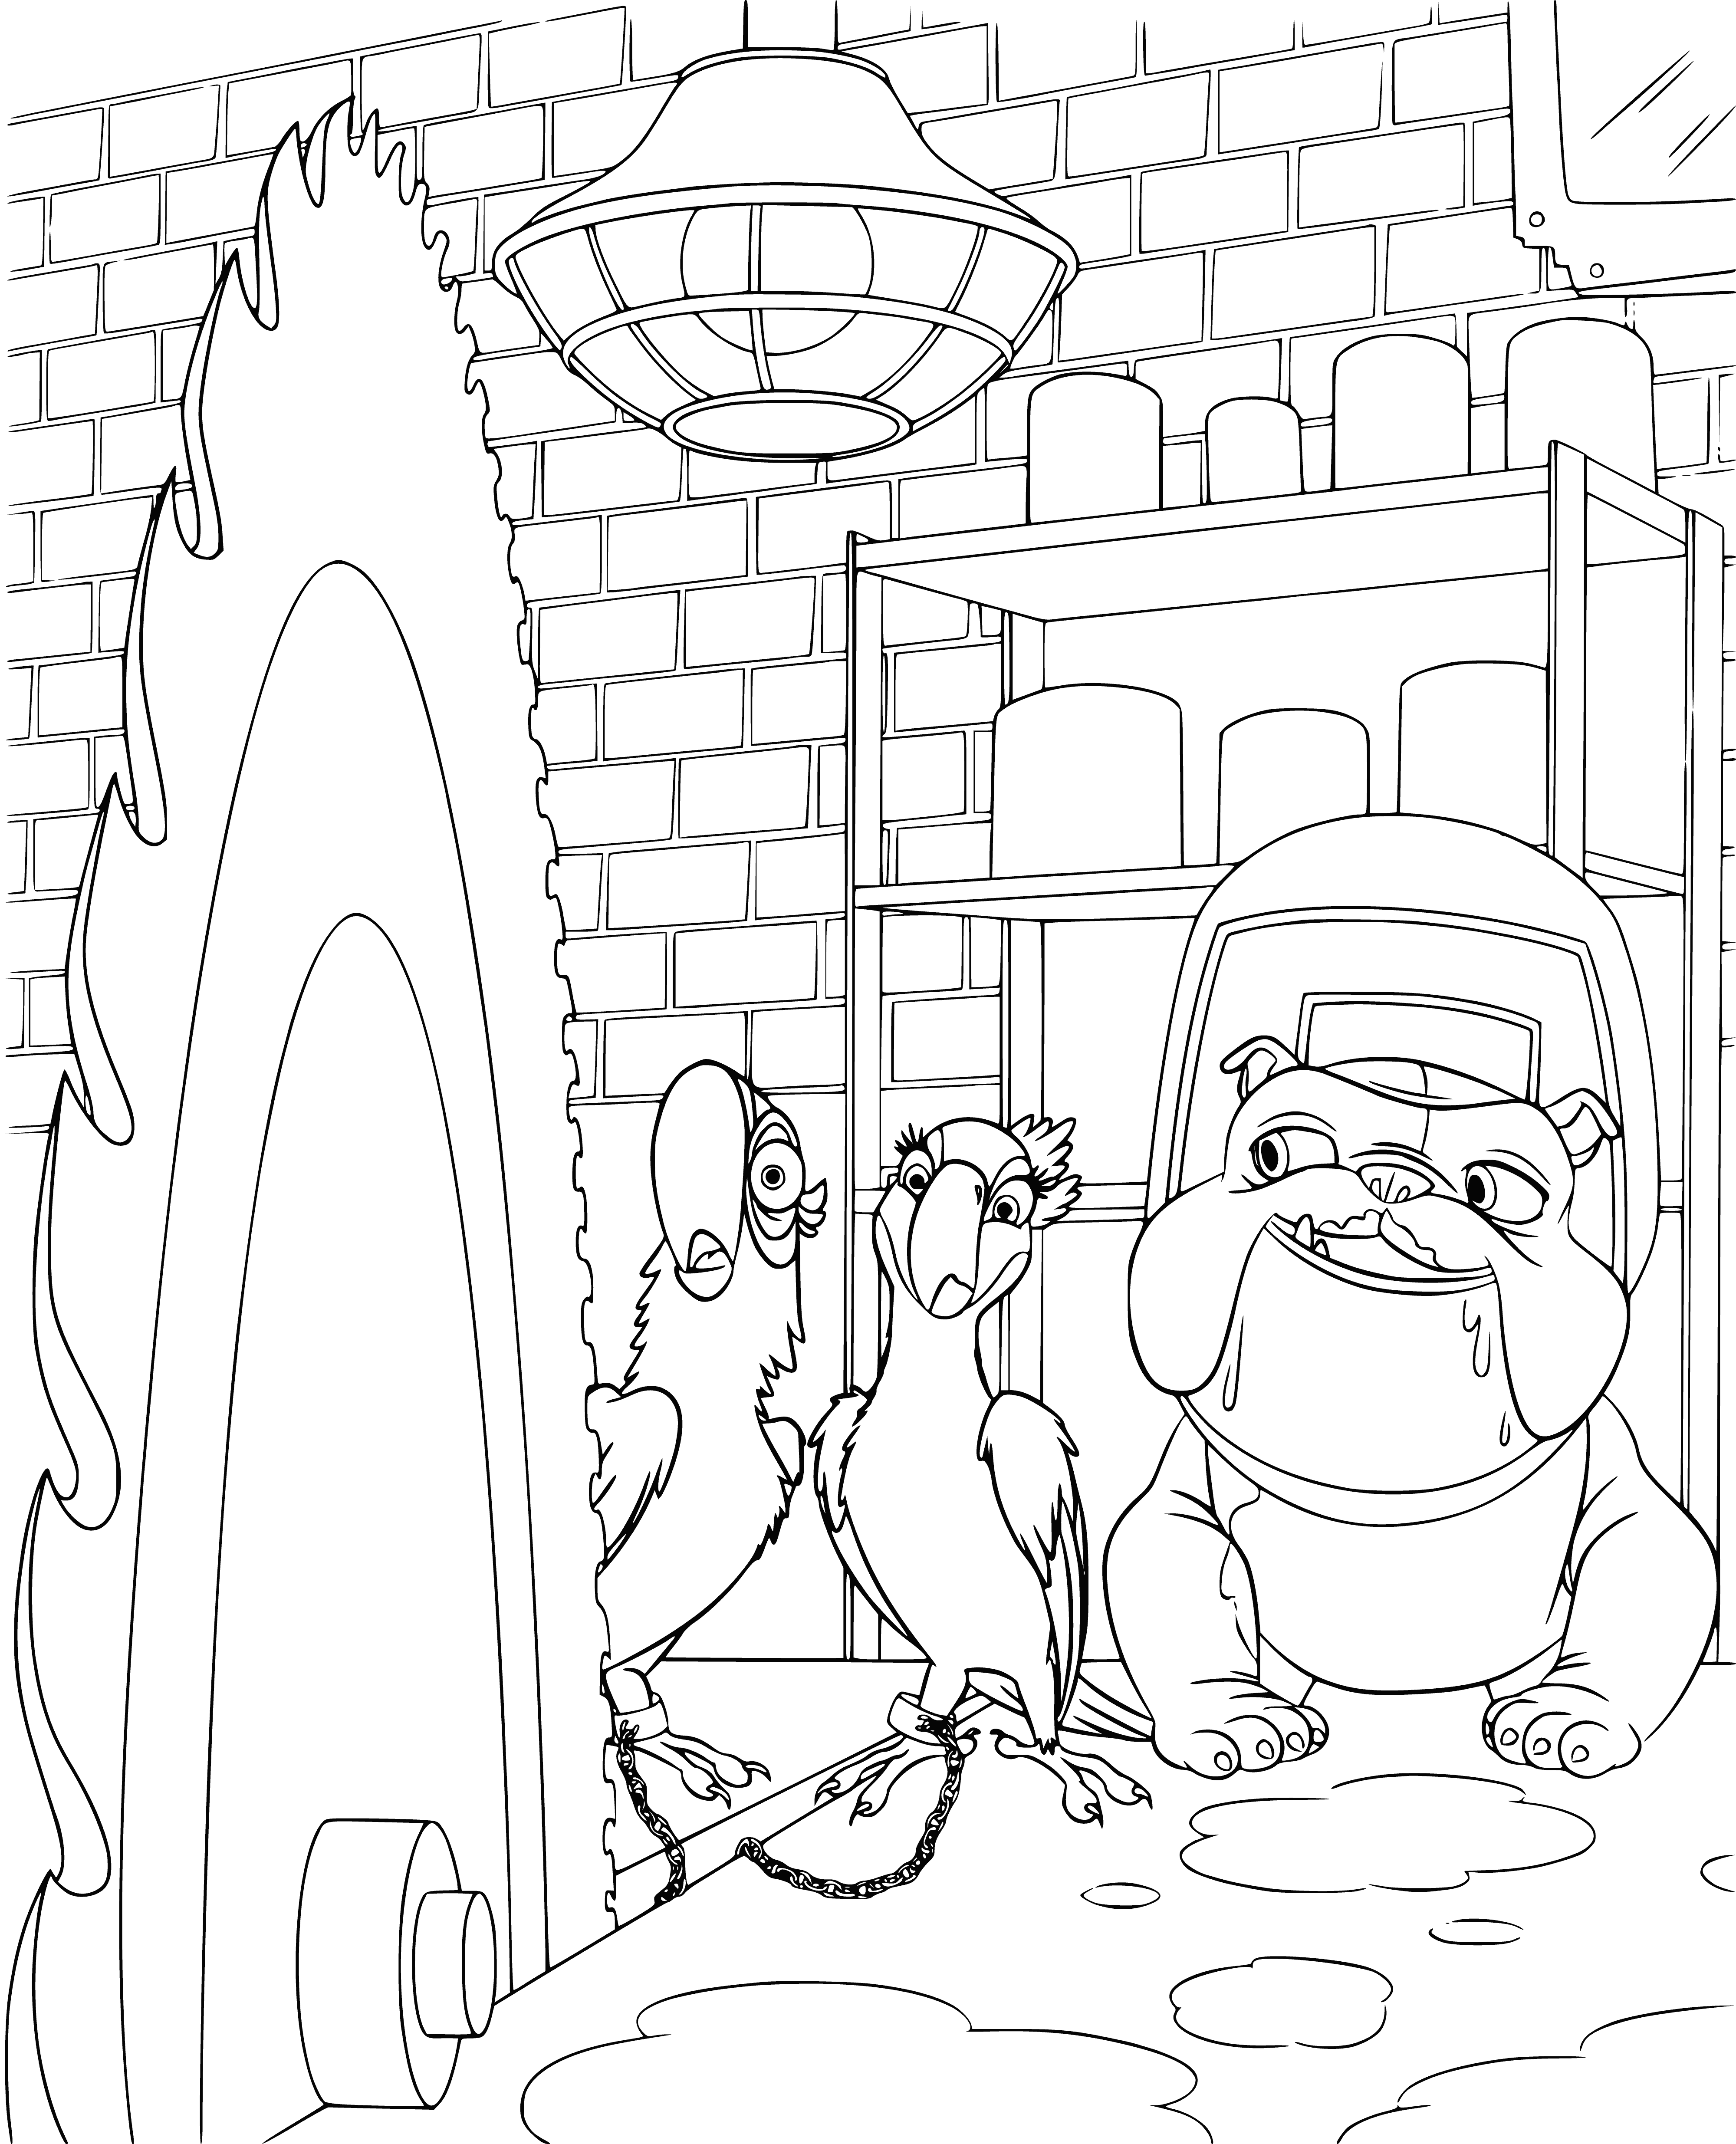 Bold decision coloring page